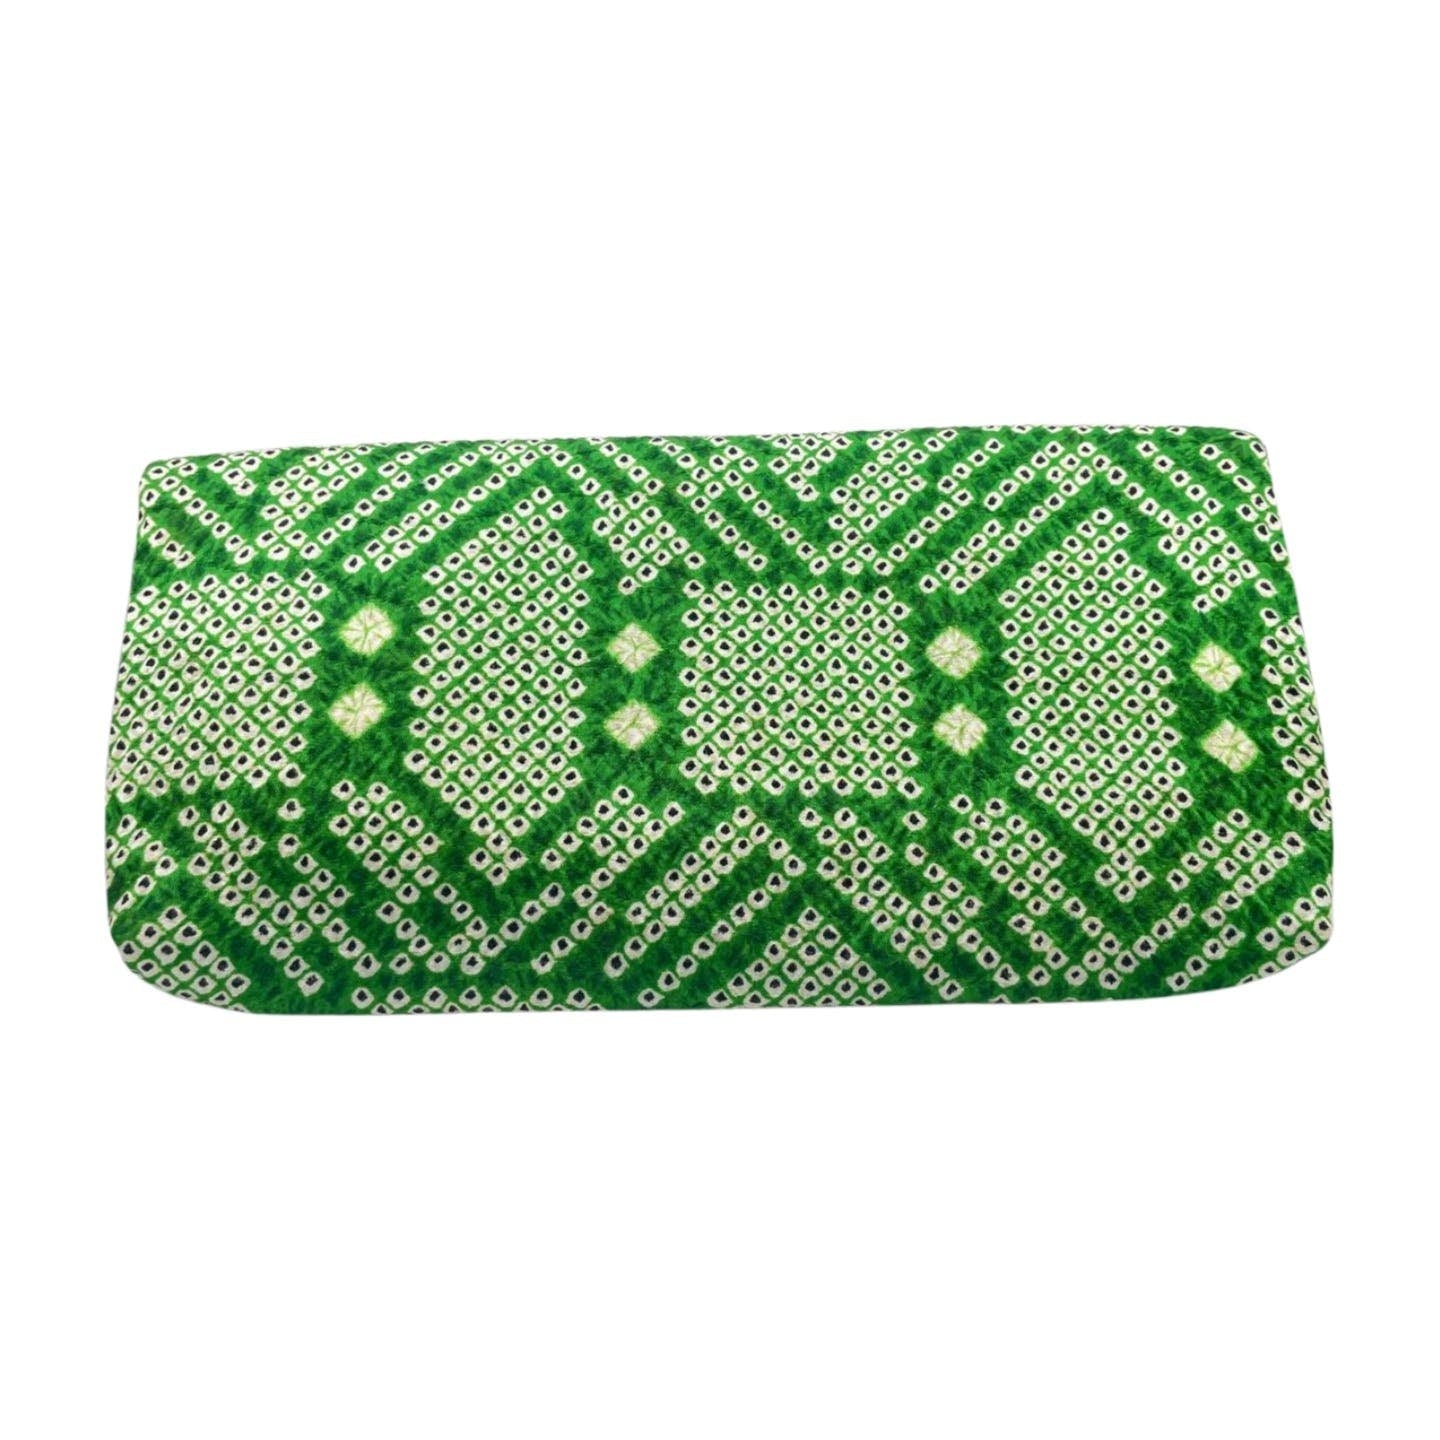 A Vintage 1970's Green Clutch by Vintage, featuring a green and white rectangular design with a geometric pattern. The intricate design includes small circular and diamond shapes, creating a repeating, symmetrical motif. Crafted from crinkled silk, the clutch has a textured fabric appearance and boasts a secure clasp closure.